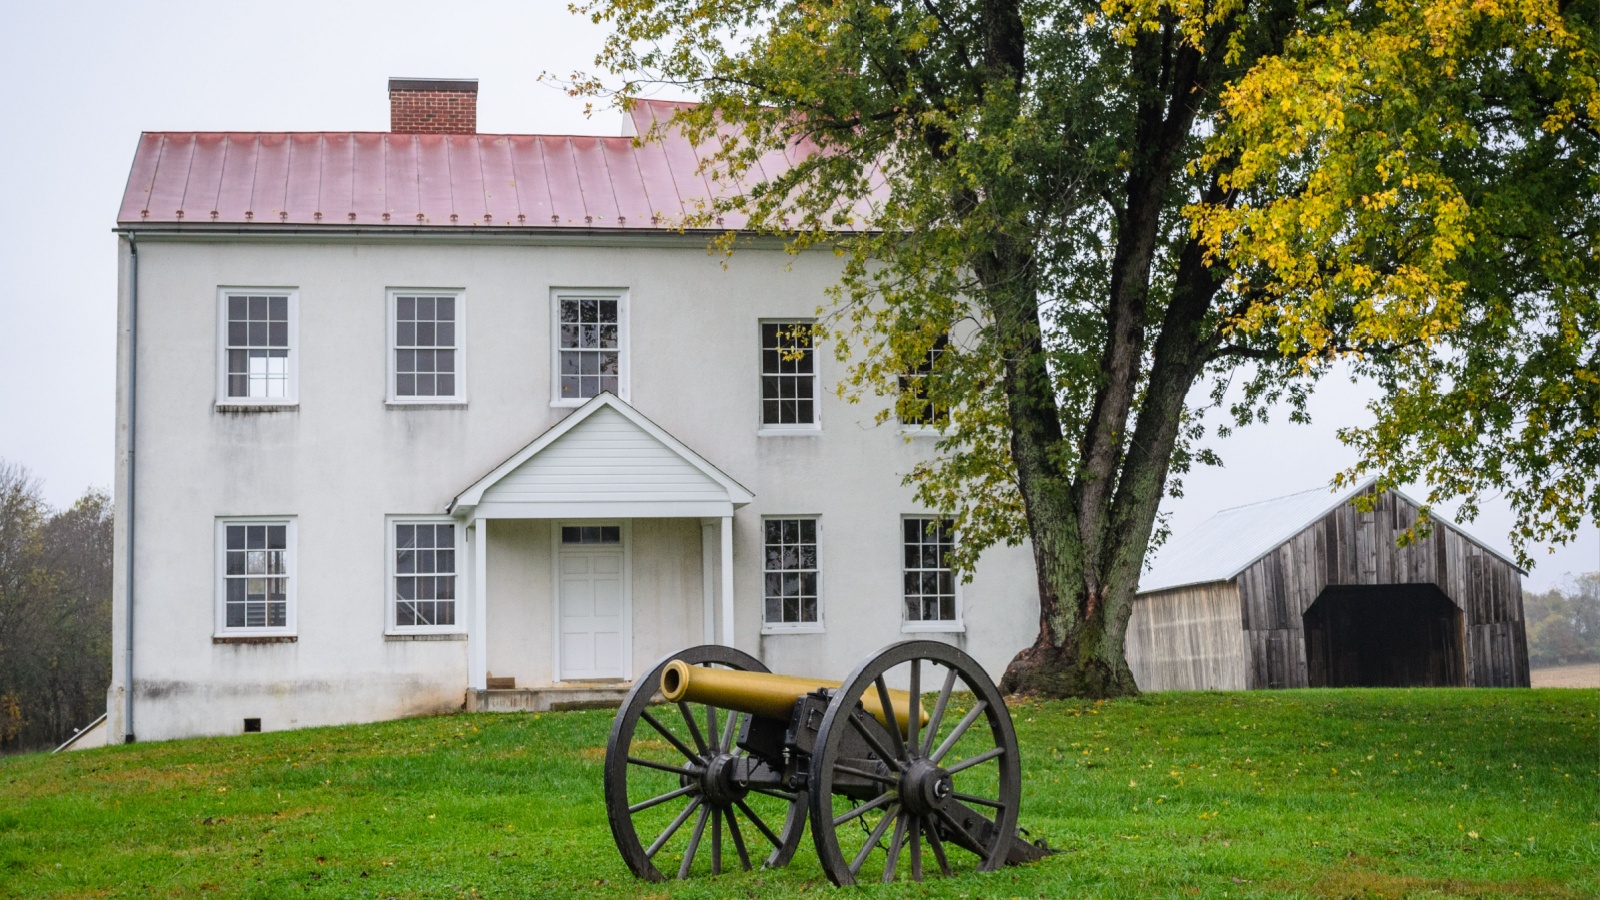 image credit: Zack Frank/Shutterstock <p>Often called “The Battle That Saved Washington,” the Battle of Monocacy delayed Confederate forces long enough to fortify Washington, D.C. The Monocacy National Battlefield offers a visitor center with exhibits and walking trails that guide tourists through key parts of the battlefield. It’s an excellent spot for those interested in understanding strategic defensive battles.</p>